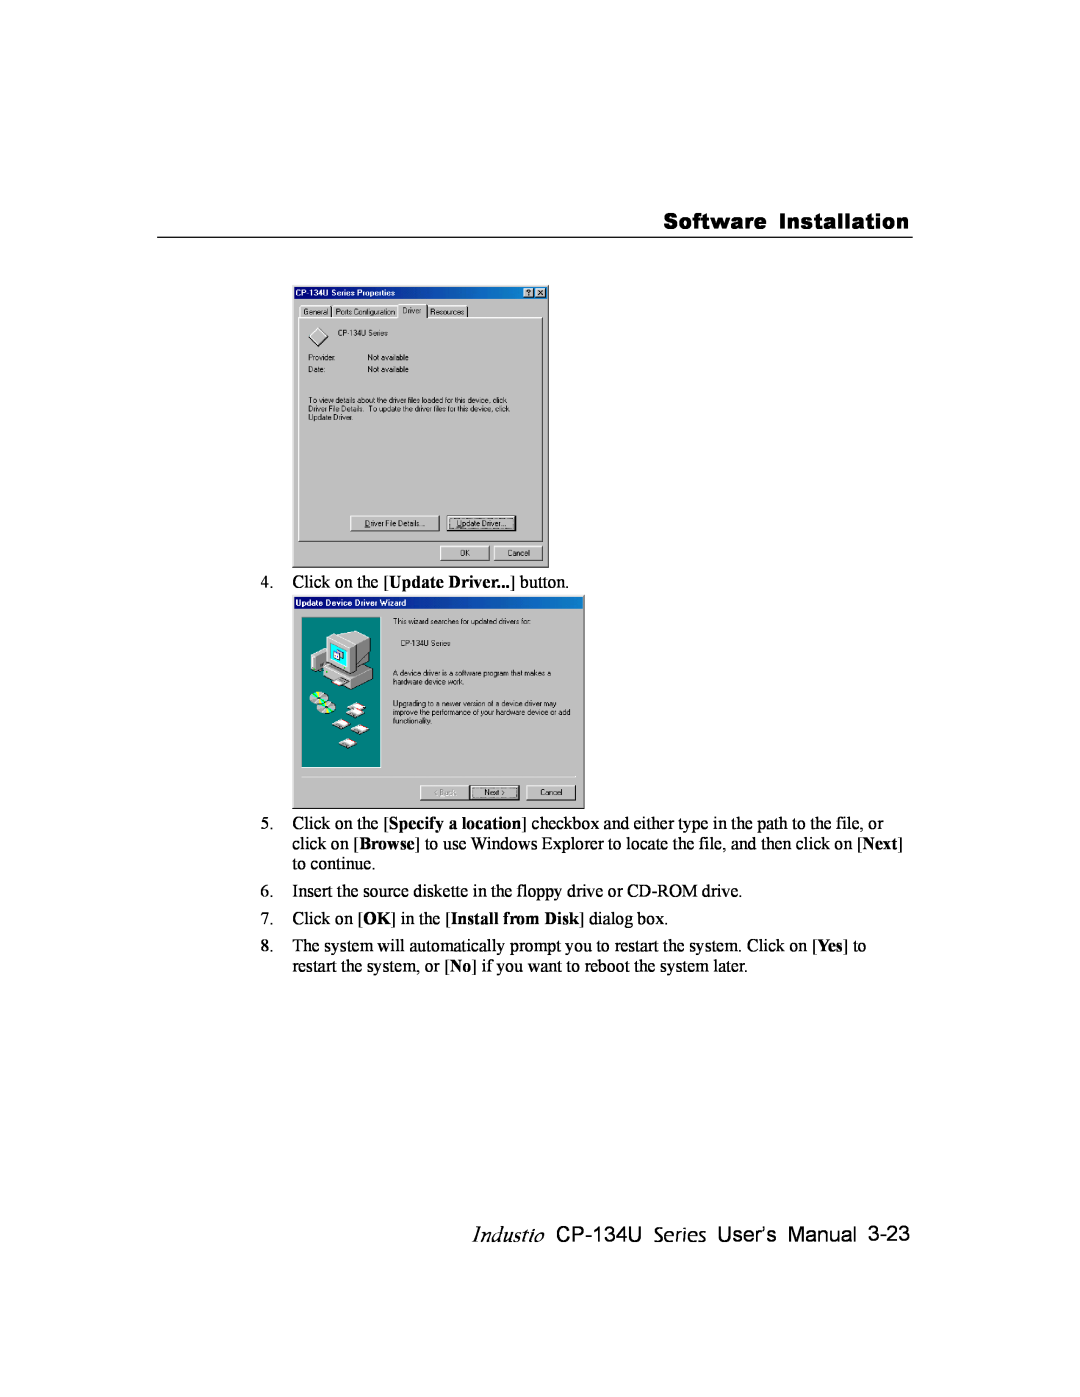 Moxa Technologies Software Installation, Industio CP-134U Series User’s Manual, Click on the Update Driver... button 